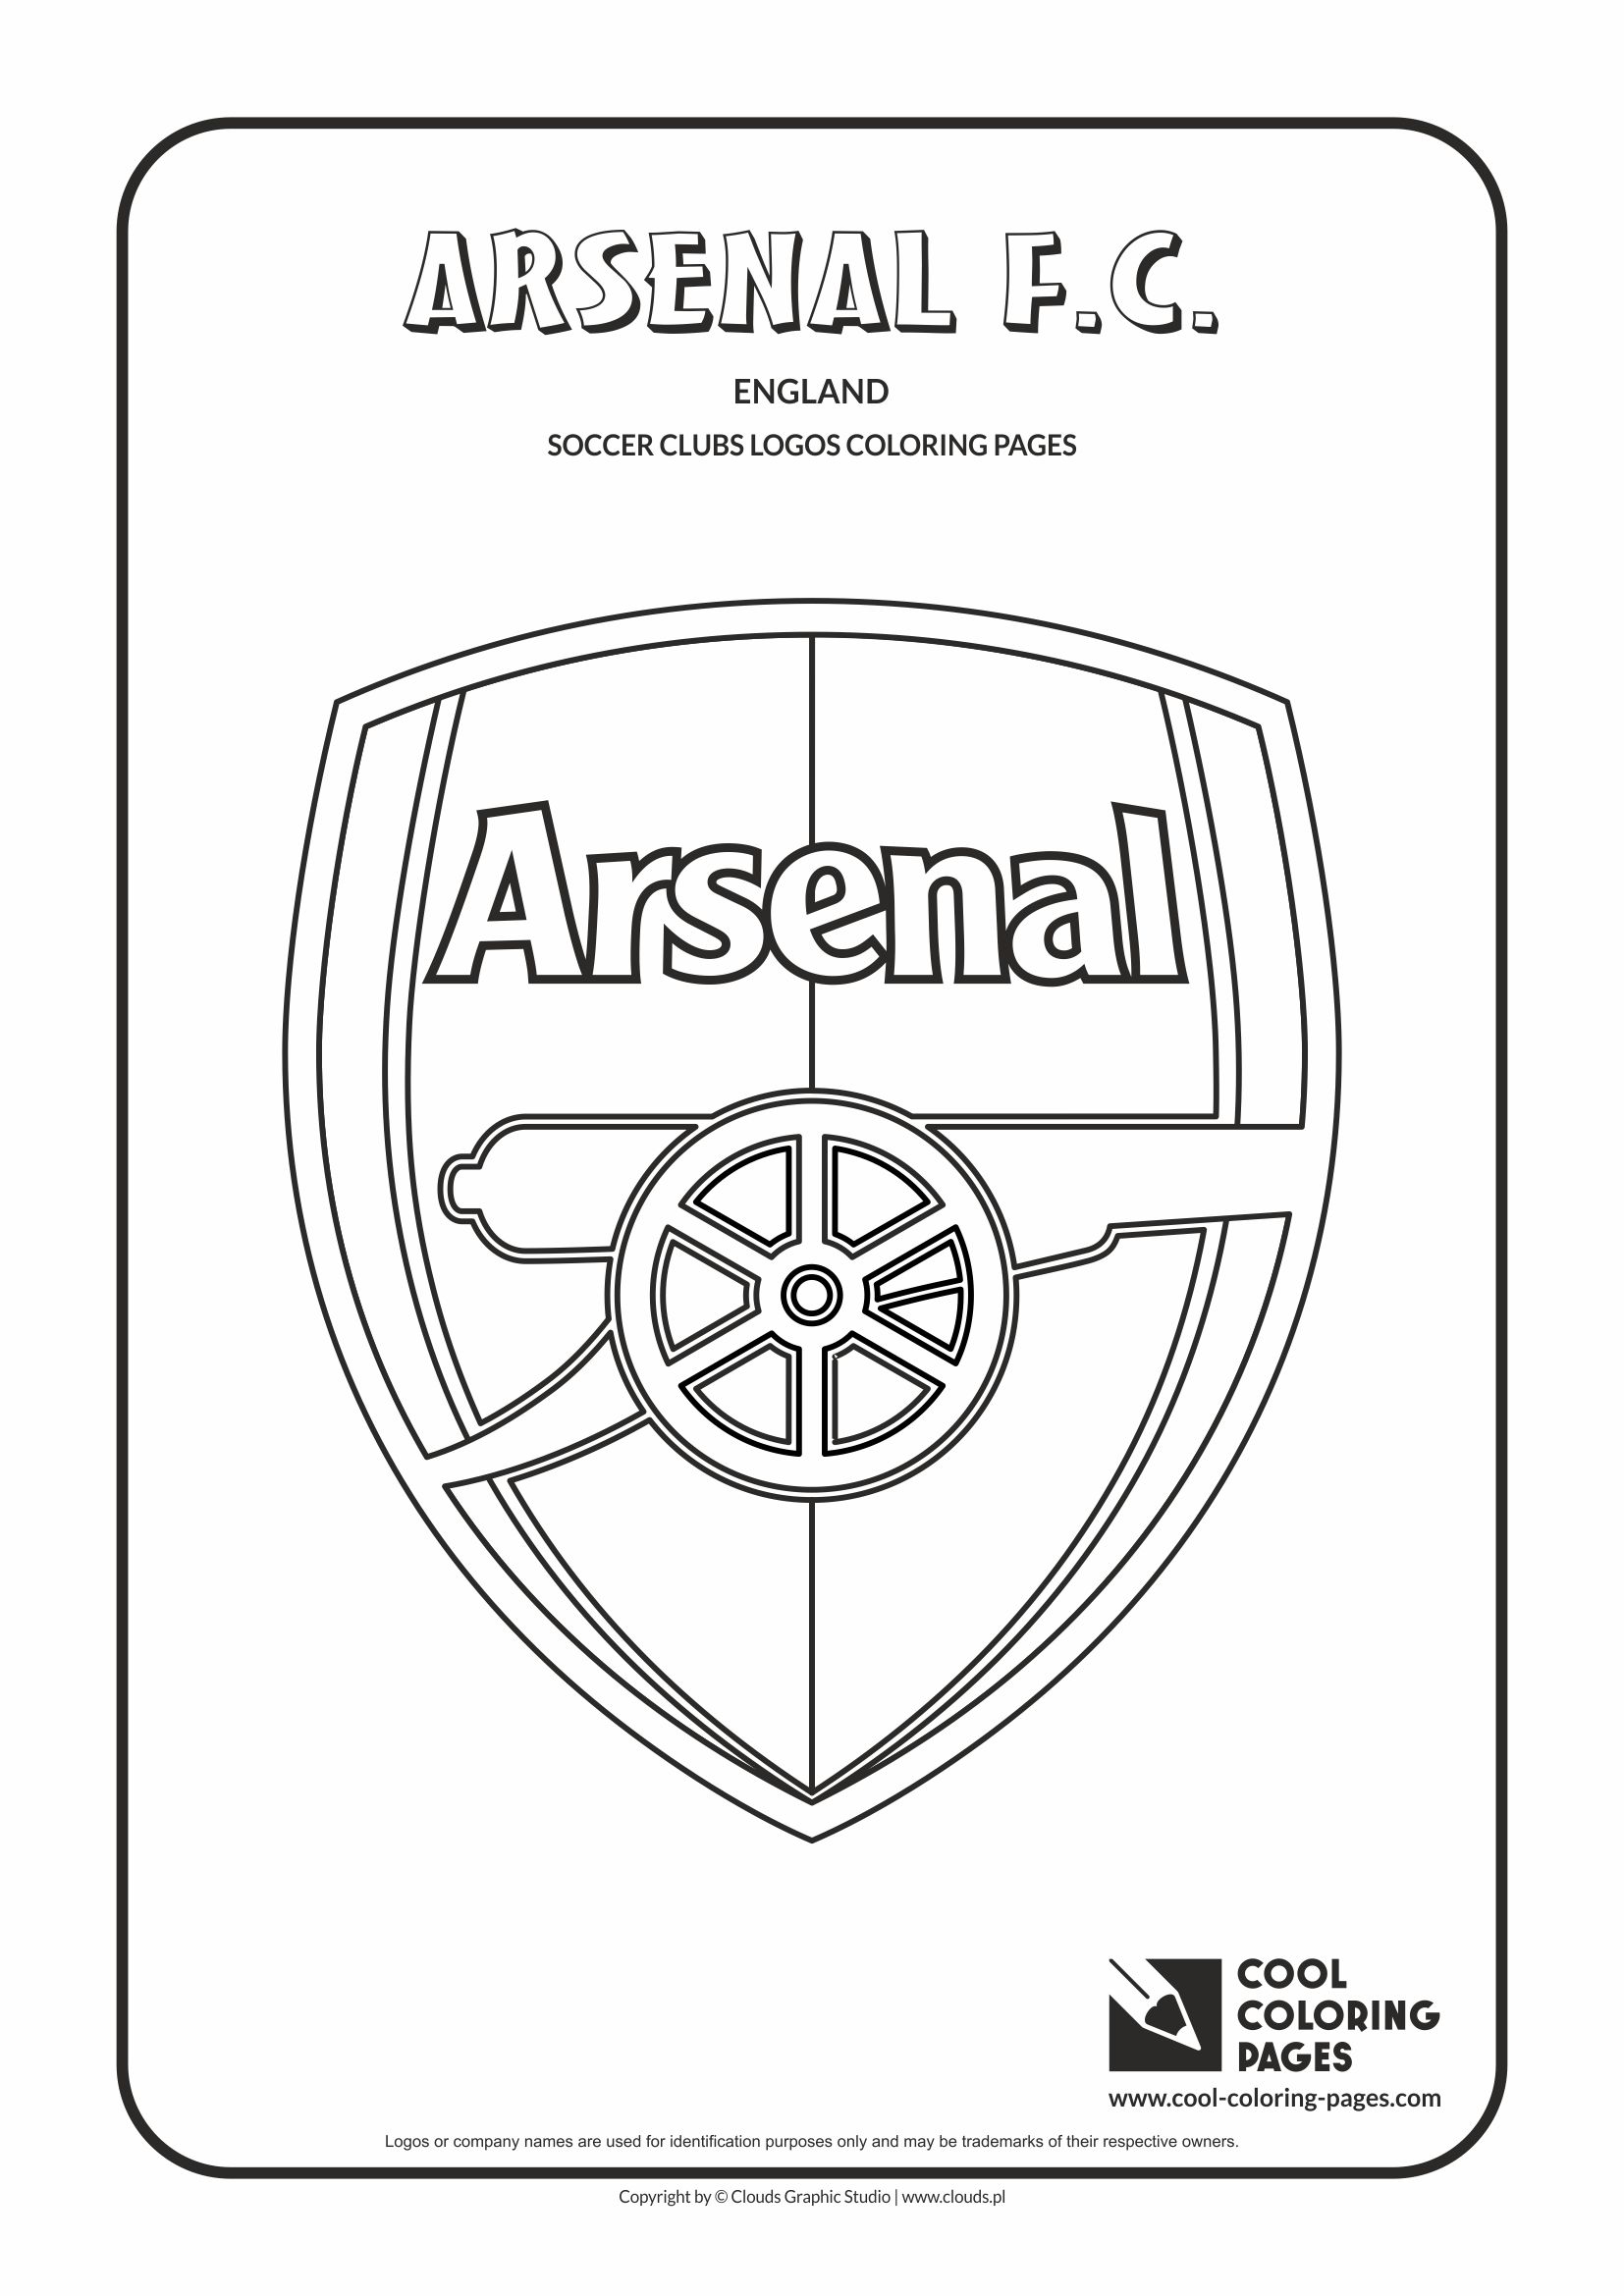 Cool Coloring Pages - Soccer Club Logos / Arsenal F.C. logo / Coloring page with Arsenal F.C. logo